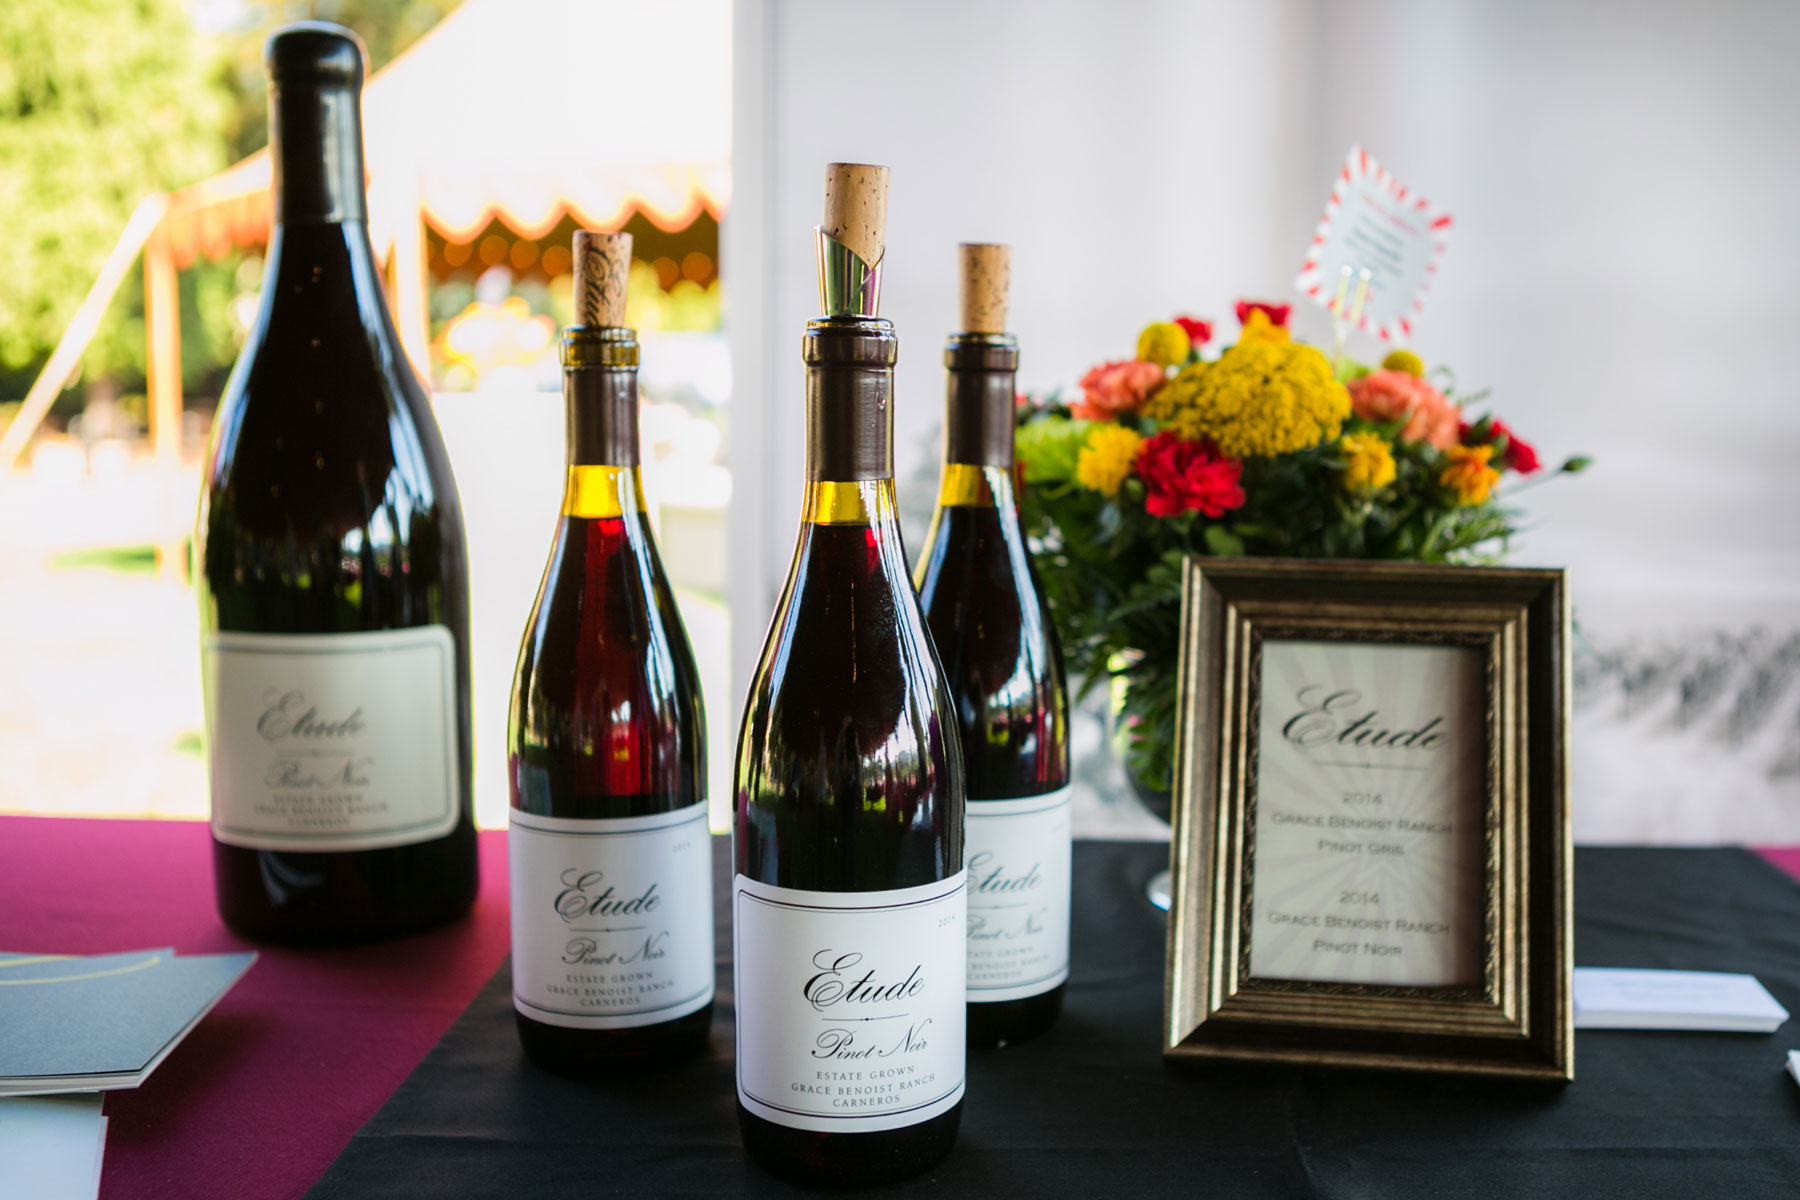 Chateau-St-Jean-Events-7-Sonoma